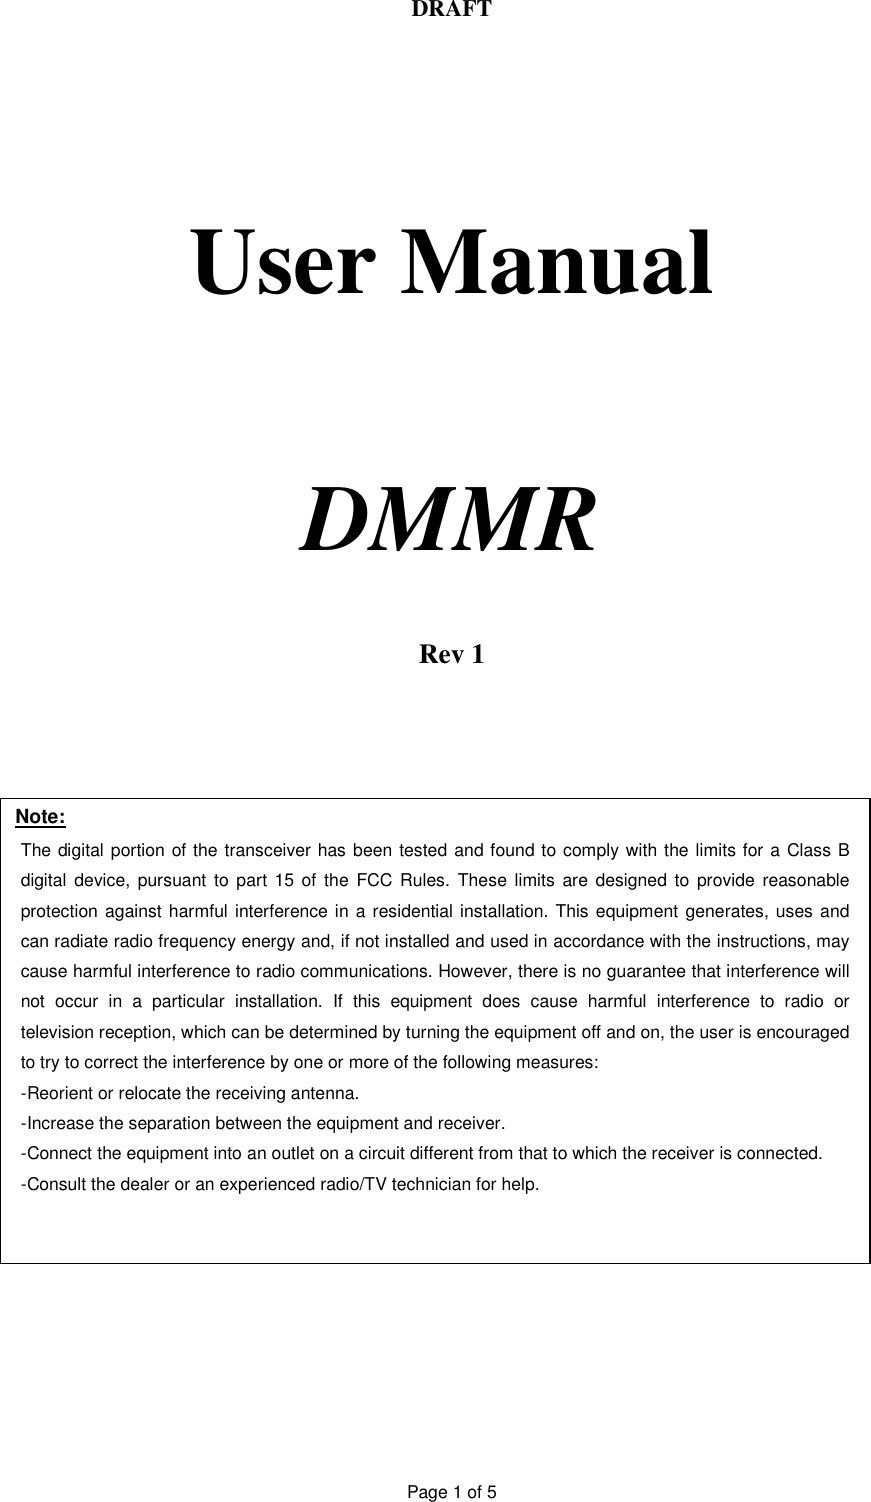 DRAFT Page 1 of 5     User Manual     DMMR    Rev 1Note: The digital portion of the transceiver has been tested and found to comply with the limits for a Class B digital device, pursuant to part 15 of the FCC Rules. These limits are designed to provide reasonable protection against harmful interference in a residential installation. This equipment generates, uses and can radiate radio frequency energy and, if not installed and used in accordance with the instructions, may cause harmful interference to radio communications. However, there is no guarantee that interference will not occur in a particular installation. If this equipment does cause harmful interference to radio or television reception, which can be determined by turning the equipment off and on, the user is encouraged to try to correct the interference by one or more of the following measures:  -Reorient or relocate the receiving antenna. -Increase the separation between the equipment and receiver. -Connect the equipment into an outlet on a circuit different from that to which the receiver is connected. -Consult the dealer or an experienced radio/TV technician for help.  